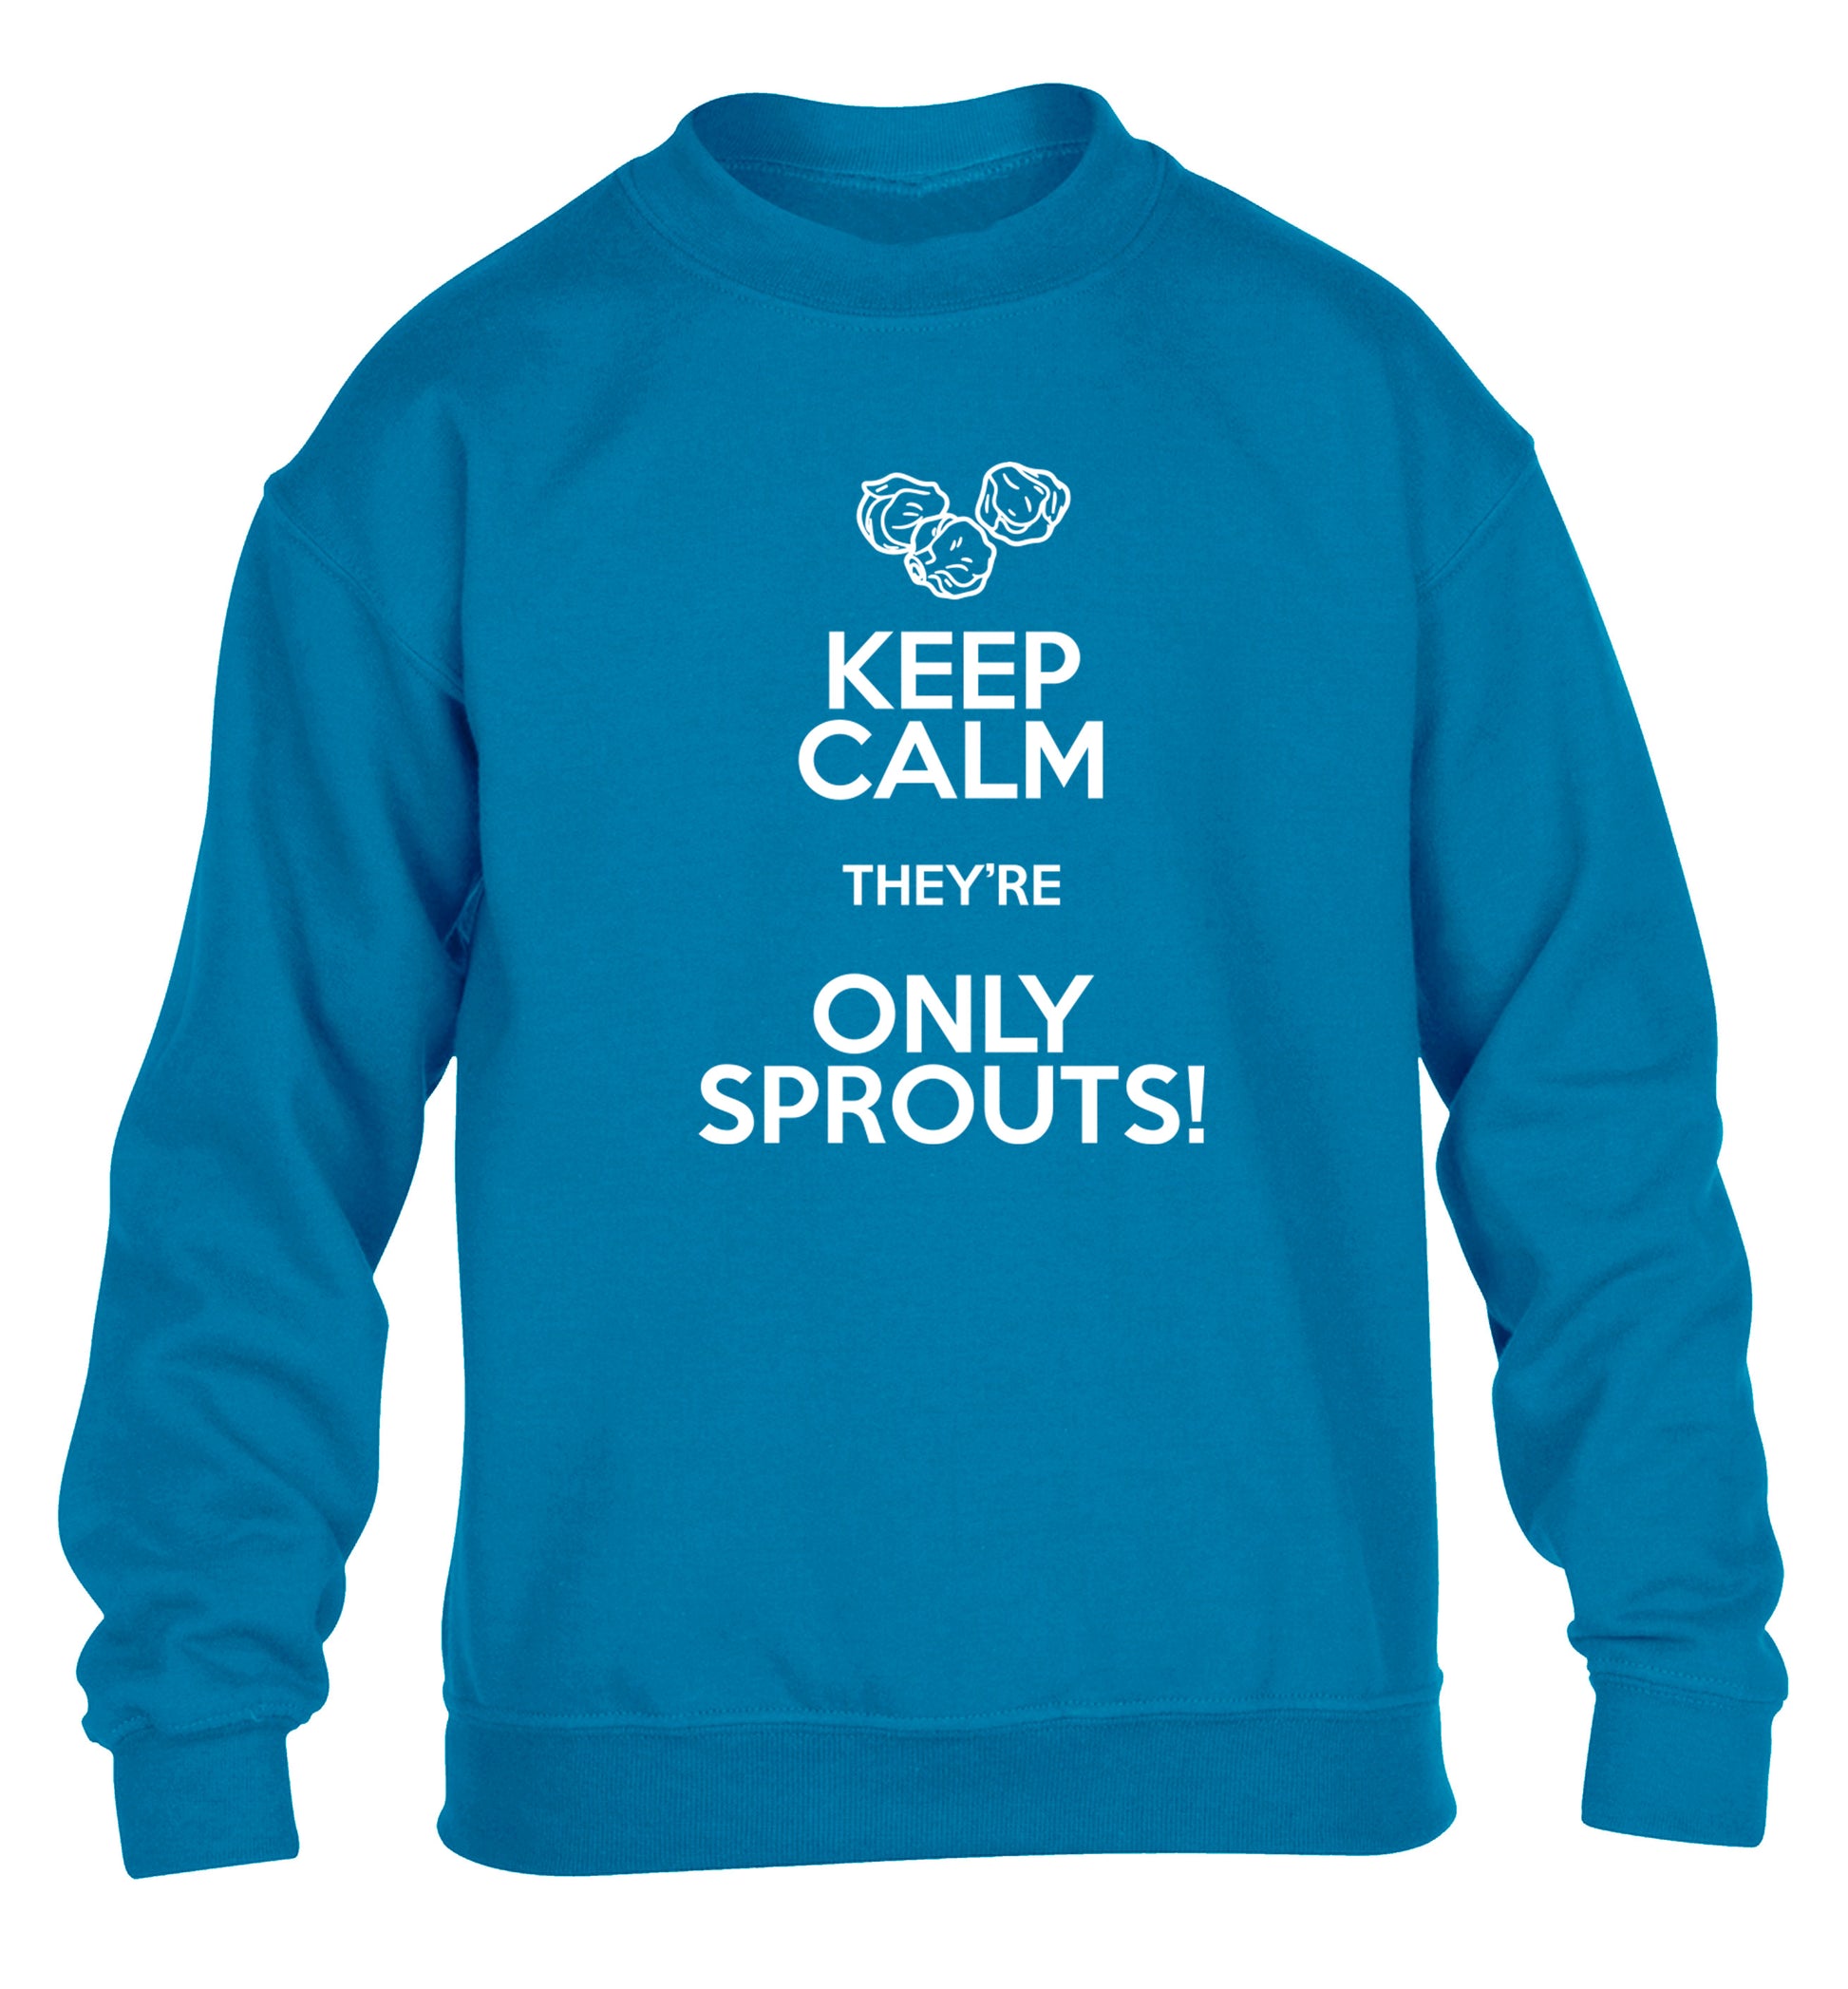 Keep calm they're only sprouts children's blue sweater 12-13 Years